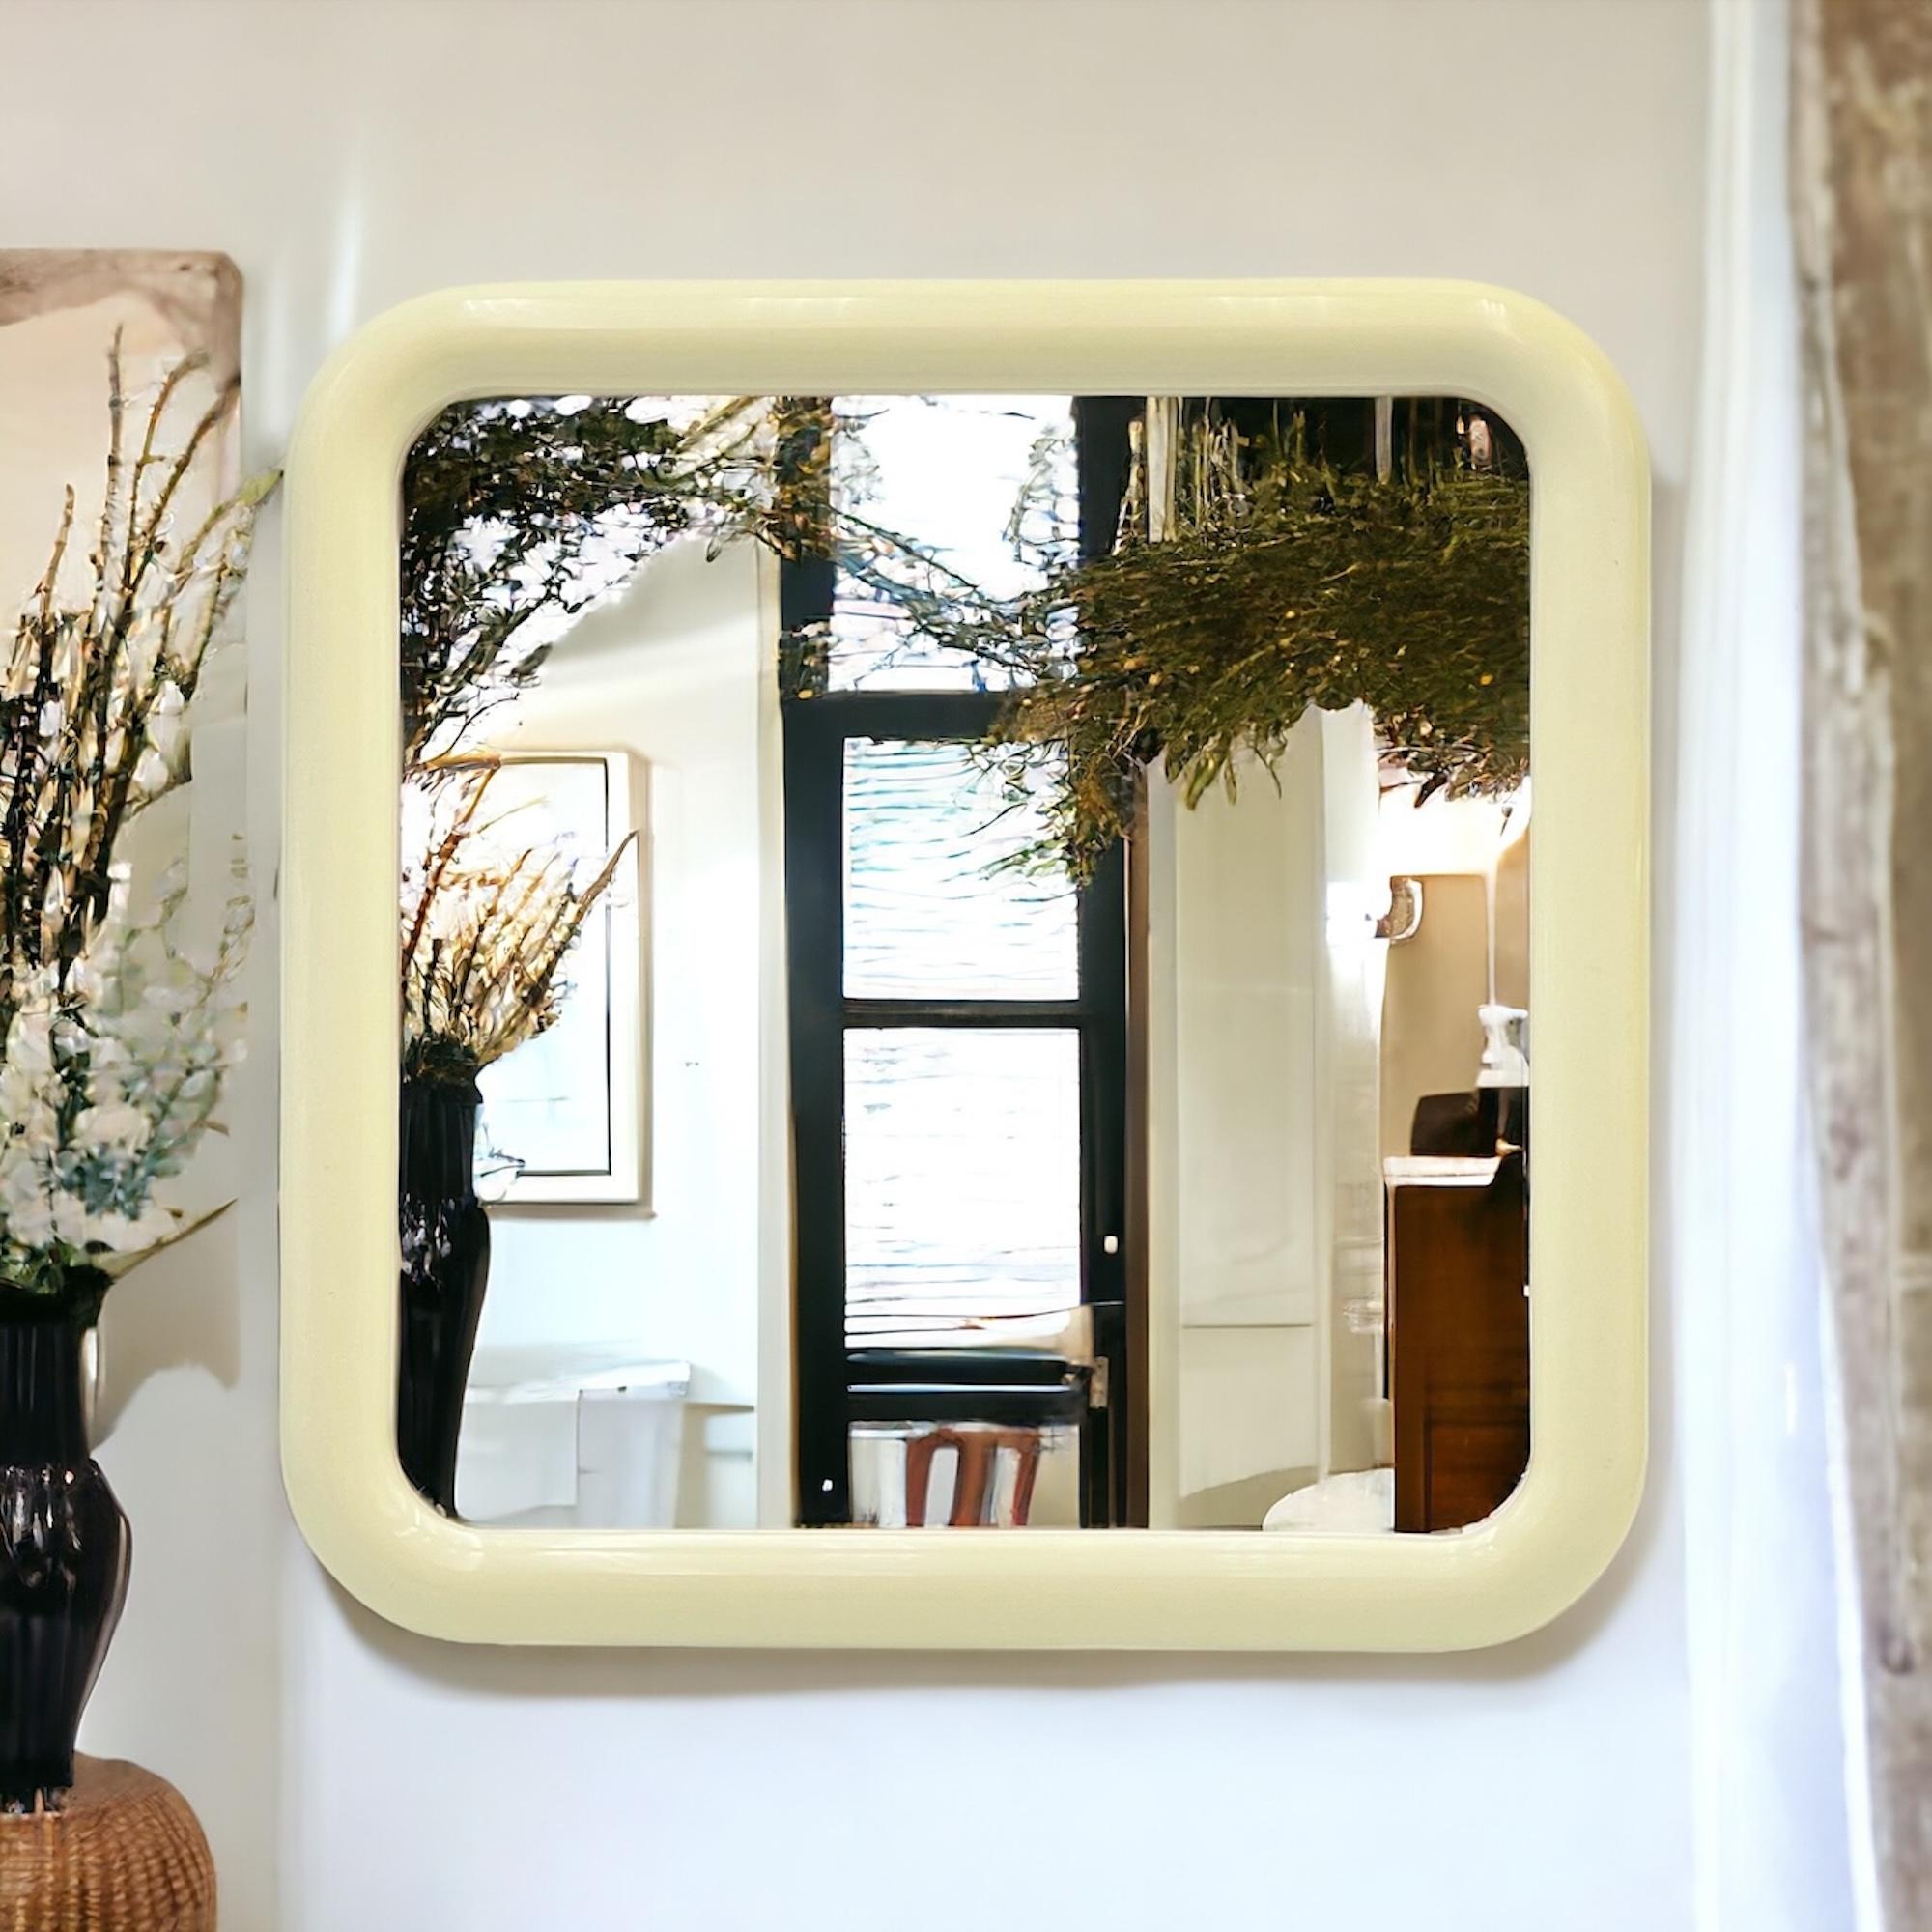 1960s Italian Space Age Wall Mirror - Chic Design, Thick Borders, Beige Hue. 6